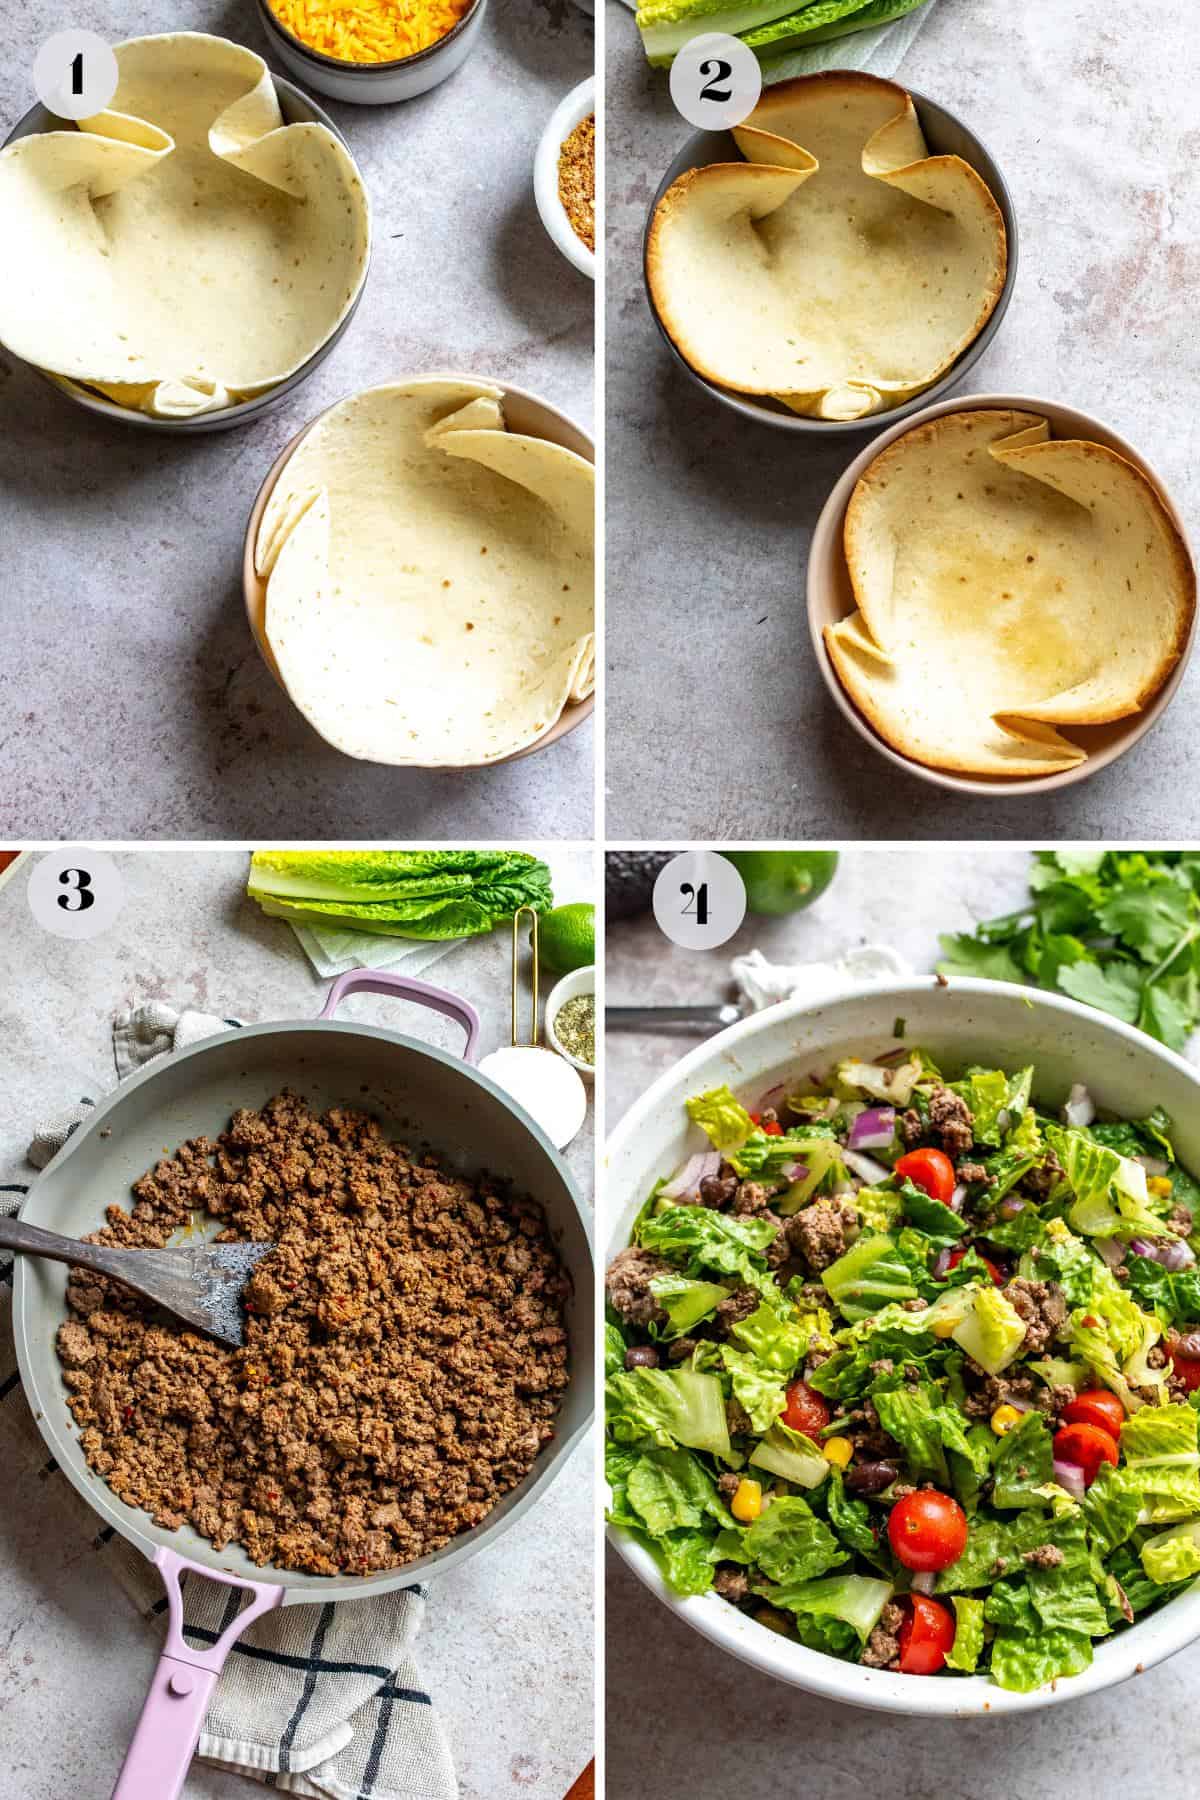 Bowls with tortillas in them to make taco shells. 